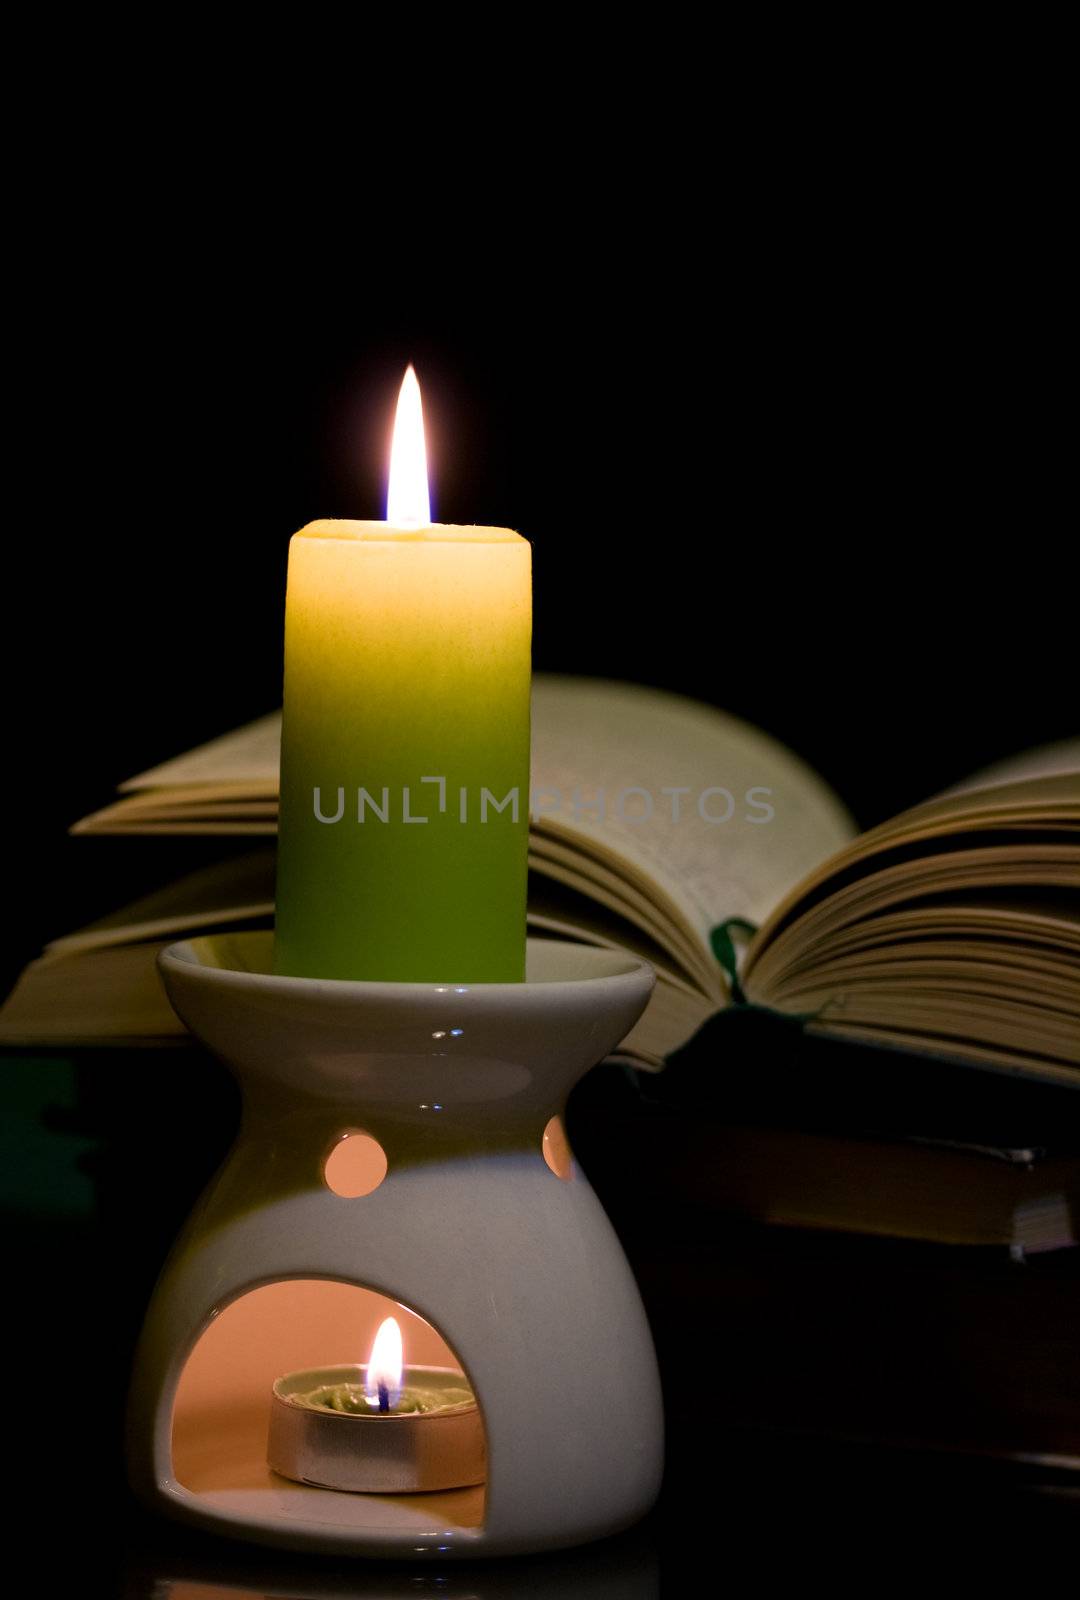 Candle and book by Irina1977